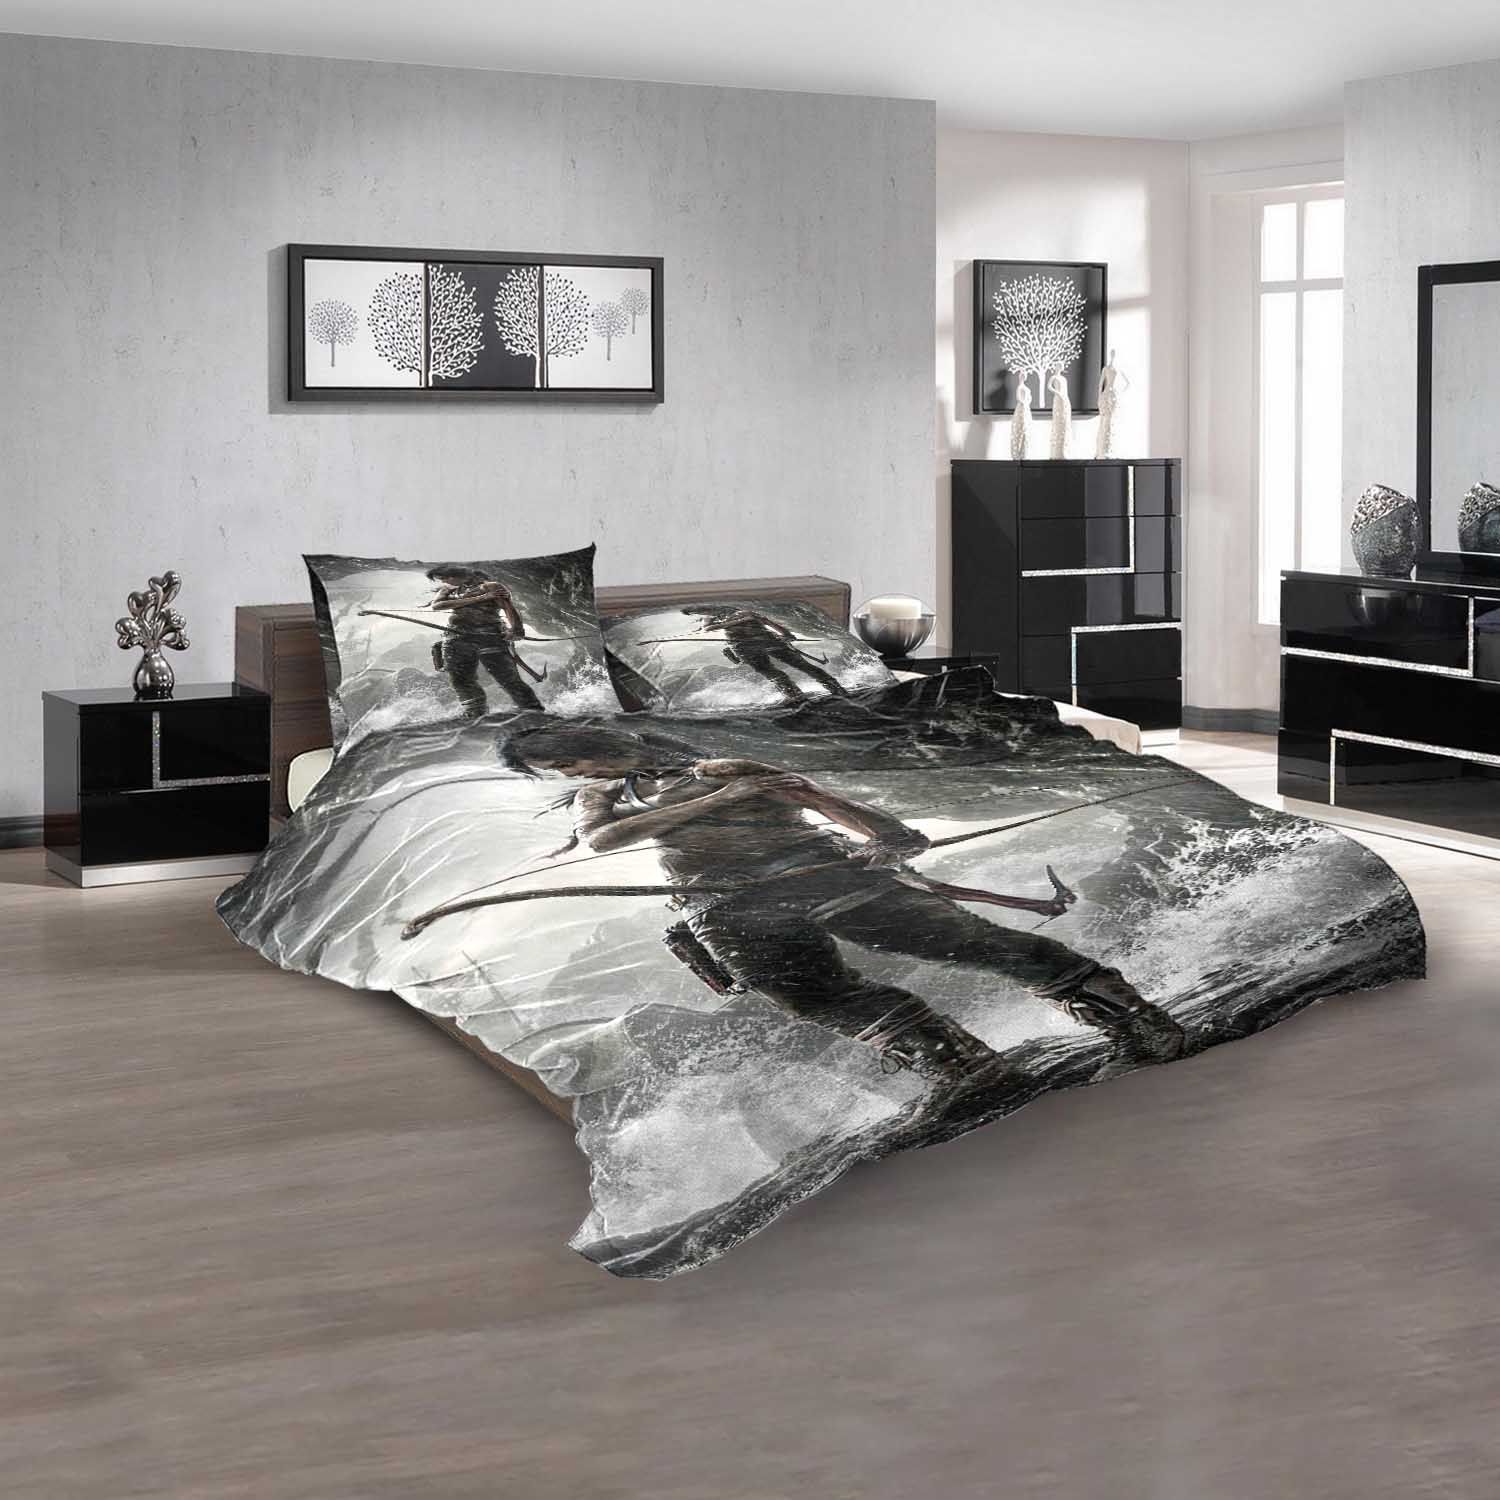 Ps3 Game Tomb Raider D Bedding Sets